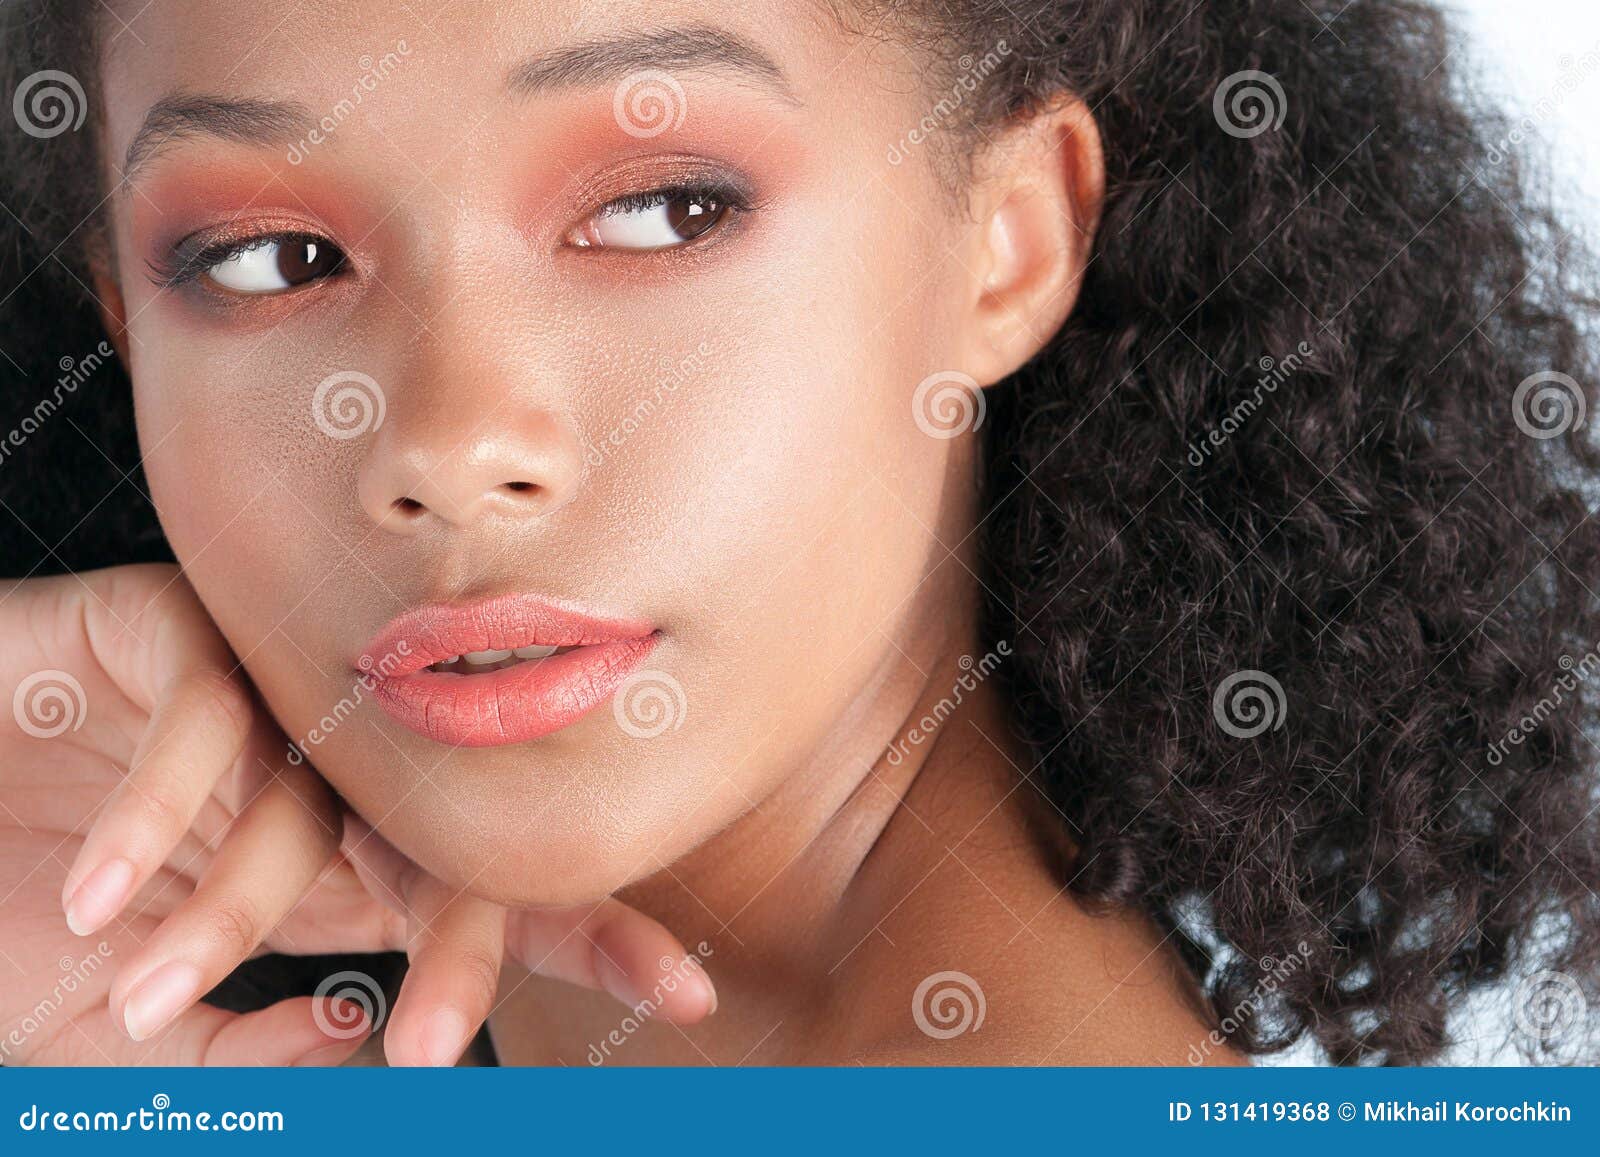 Young Beautiful Woman With Clean Perfect Skin Through Gap In Car Stock Photo - Image of fracture 